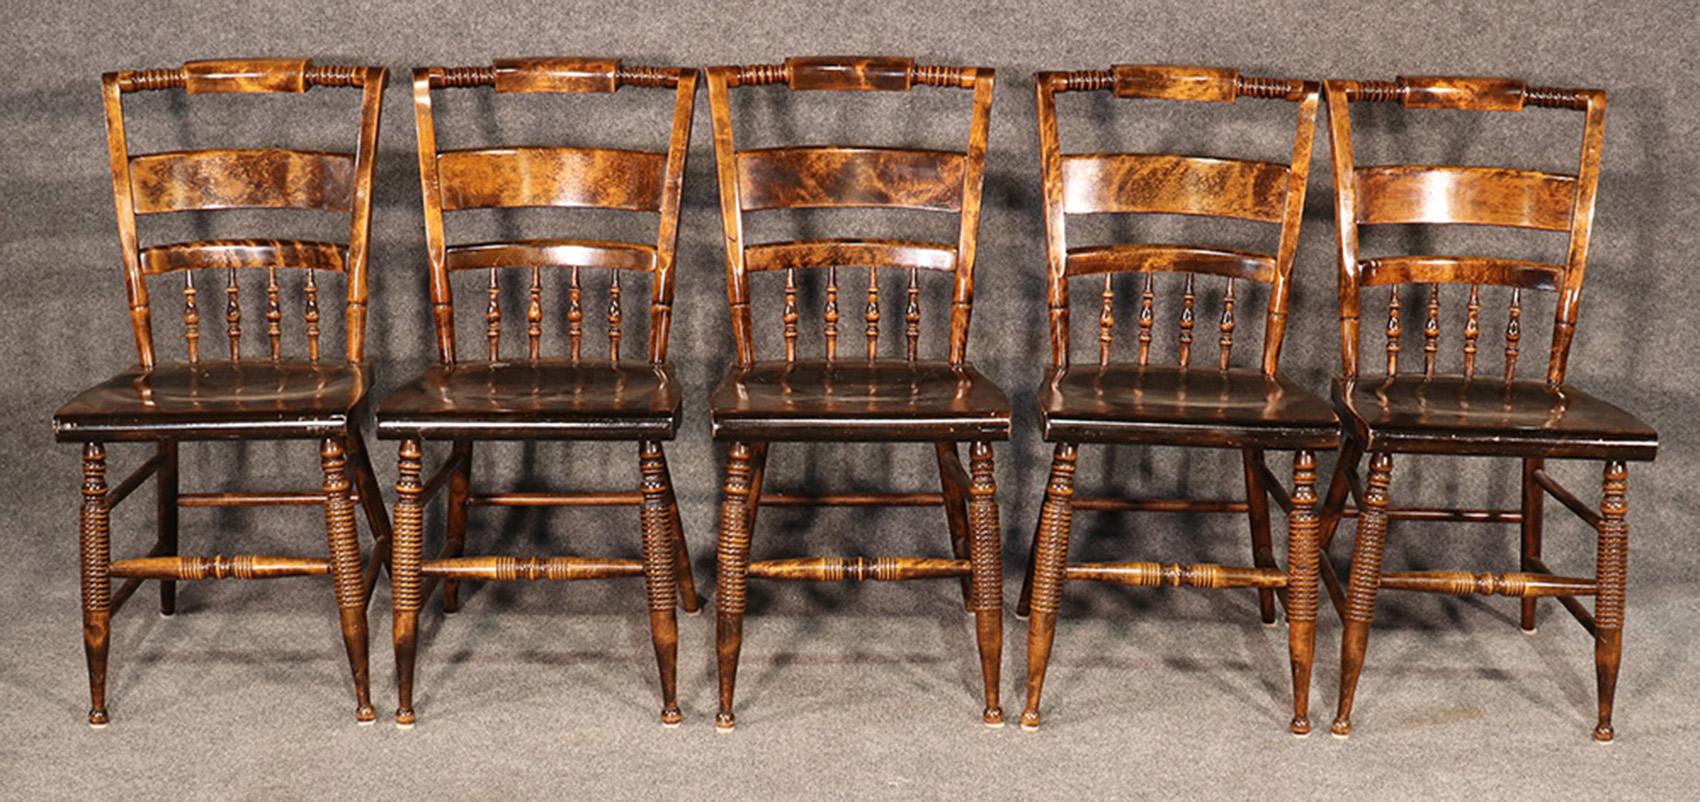 American Rare Set of 16 Nichols & Stone Rock Maple Dining Conference Chairs